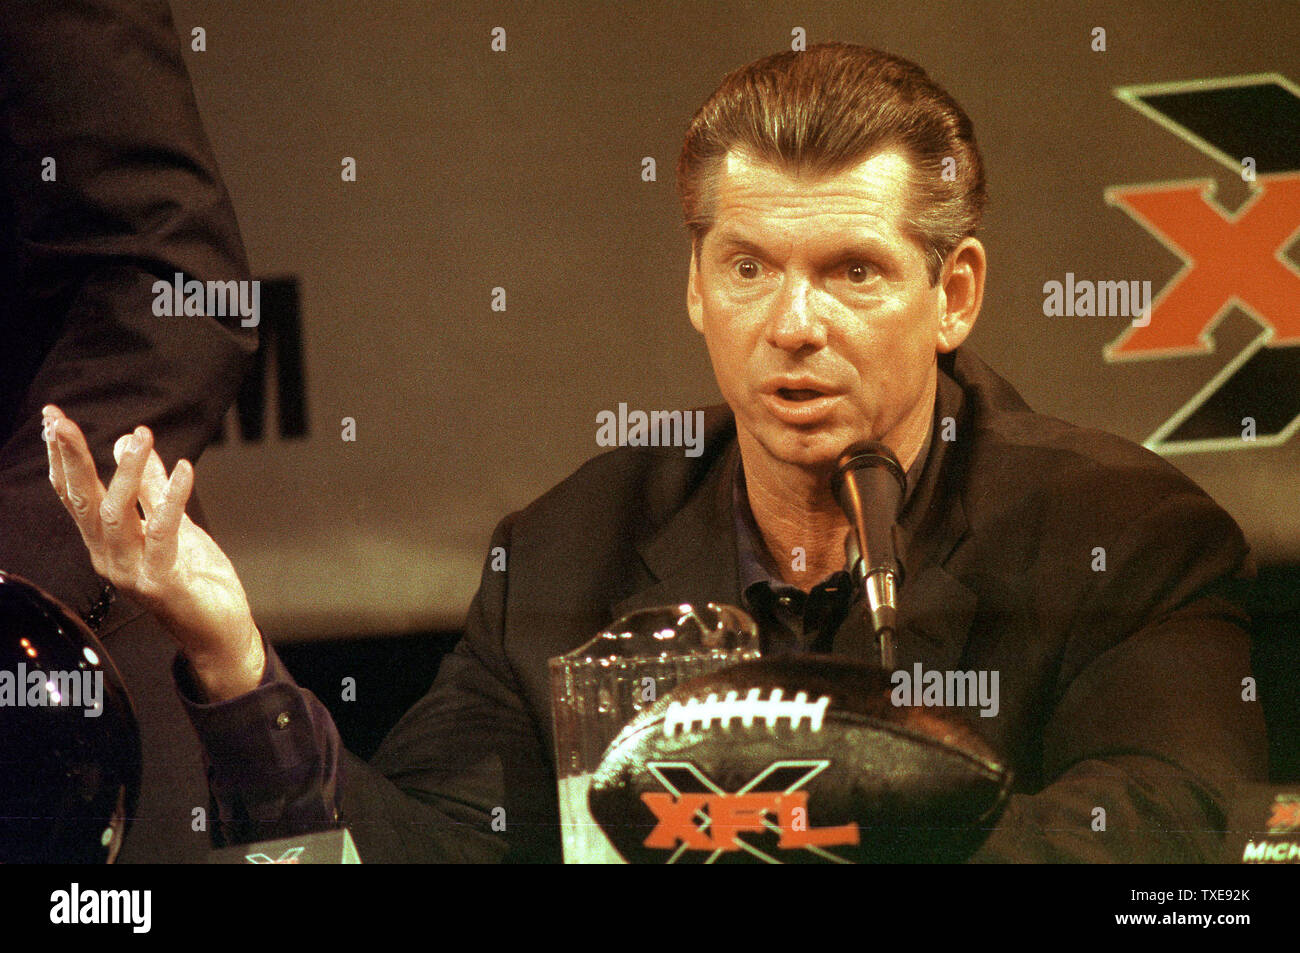 NYP2000020304 - 03 FEBRUARY 2000 - NEW YORK, NEW YORK, USA: Vince McMahon, Chairman of the World Wrestling Federation announces, February 3, the formation of the 'XFL',a new football league scheduled to start in February 2001.  rg/ep/Ezio Petersen   UPI Stock Photo